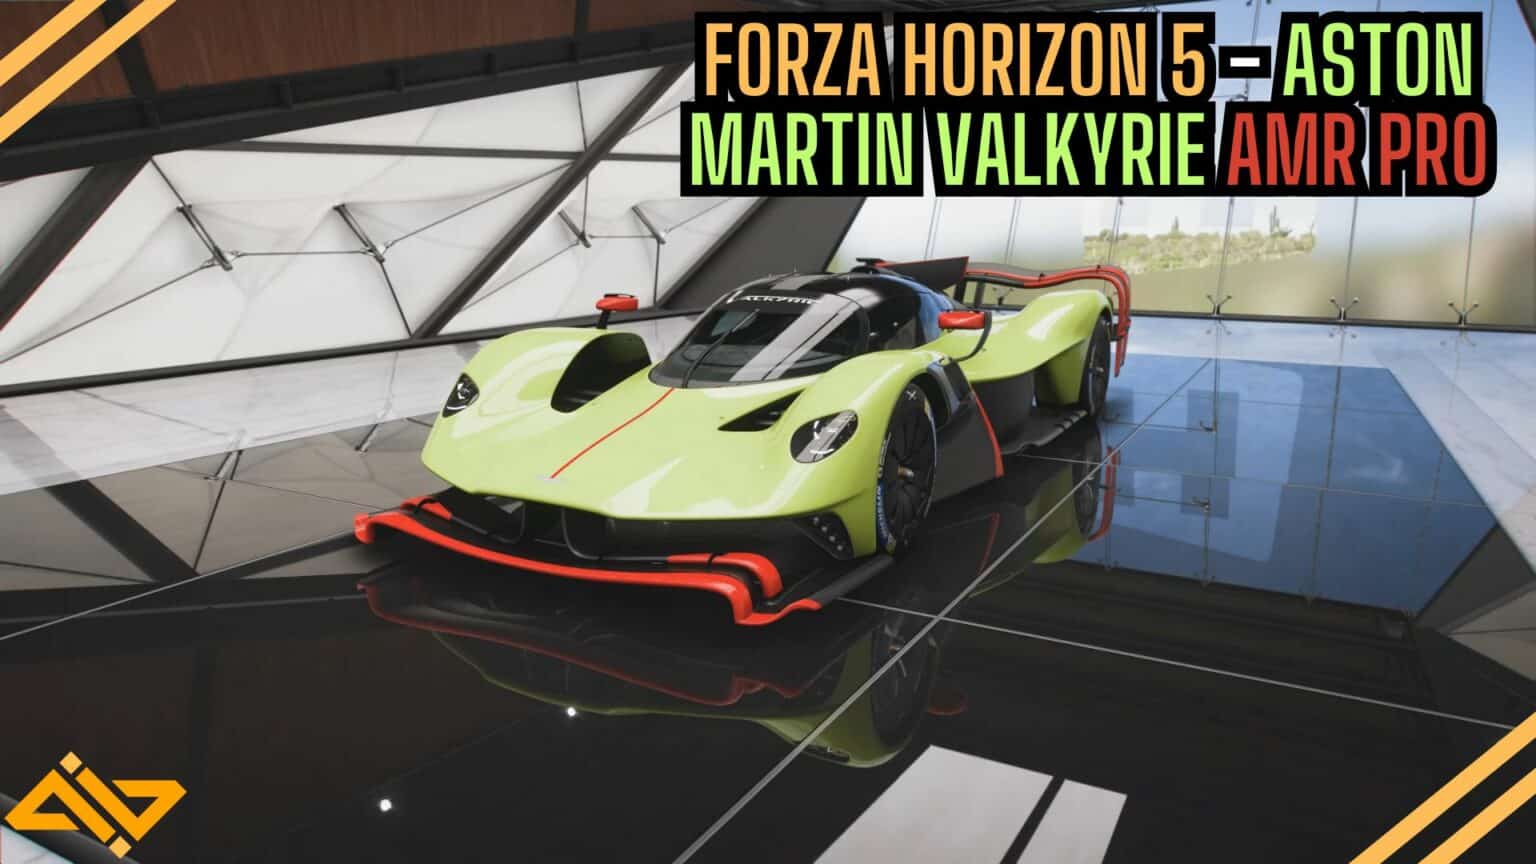 FH5 Aston Martin Valkyrie AMR Pro Feature